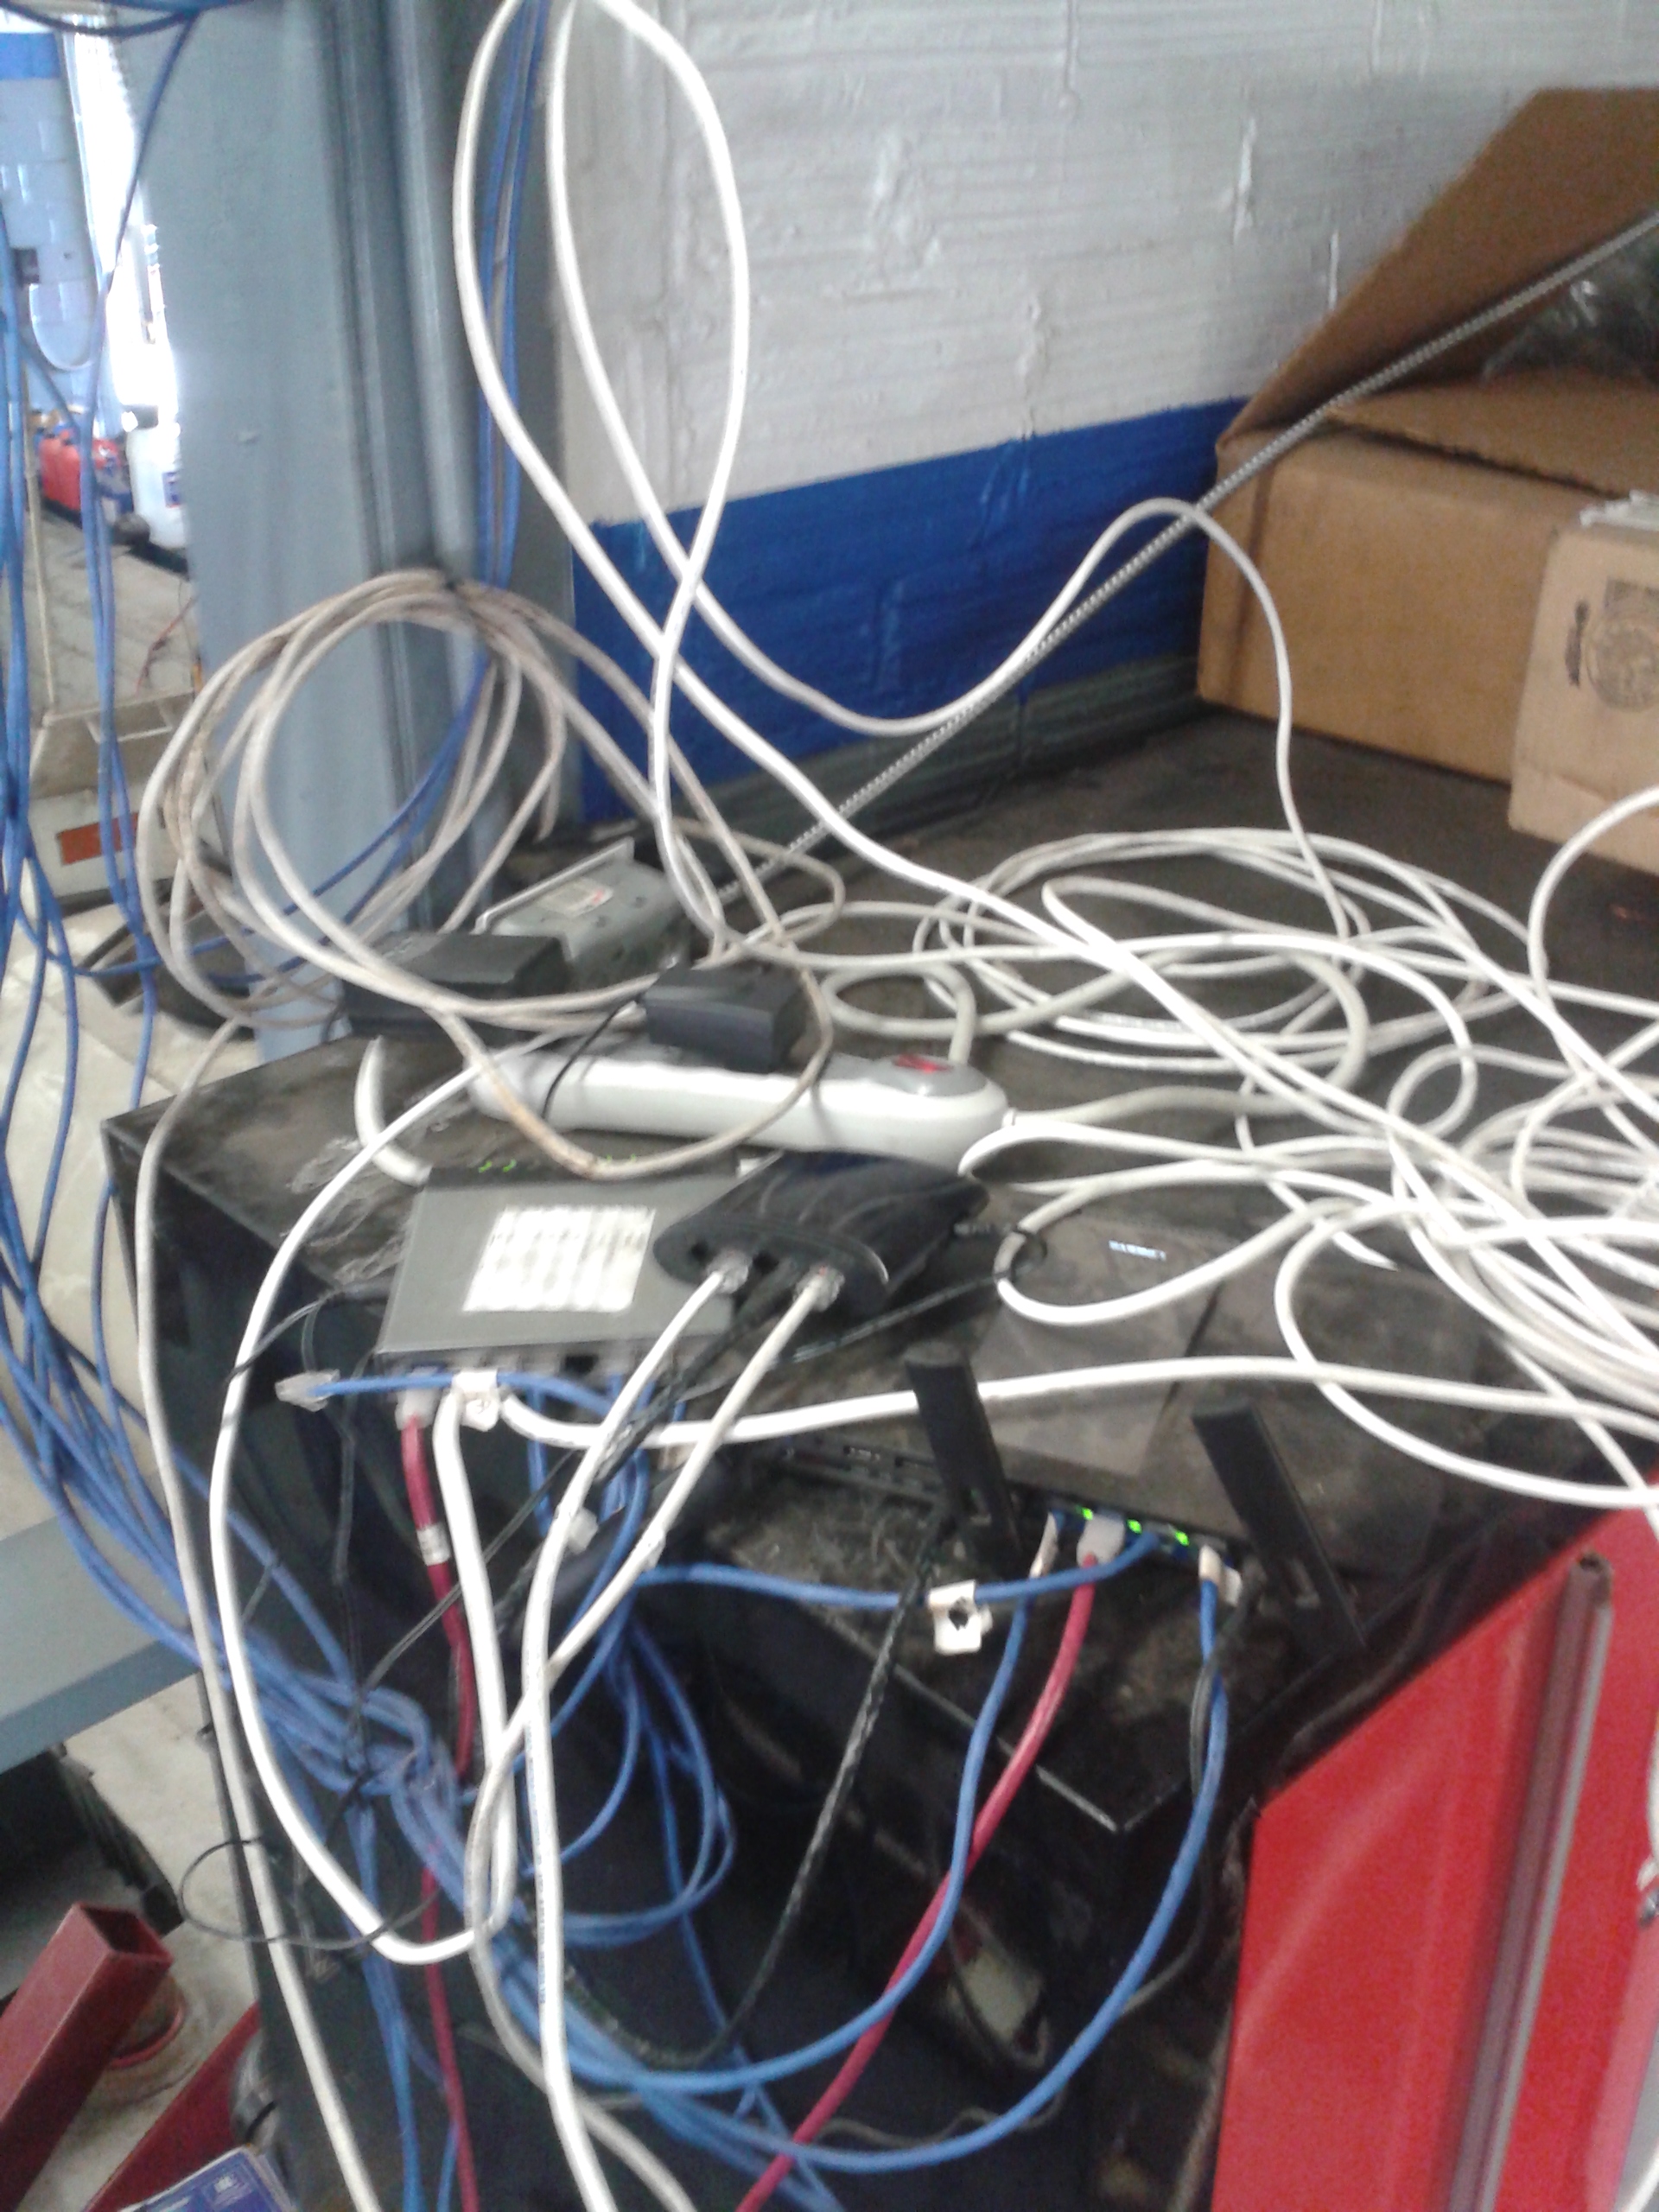 network mess